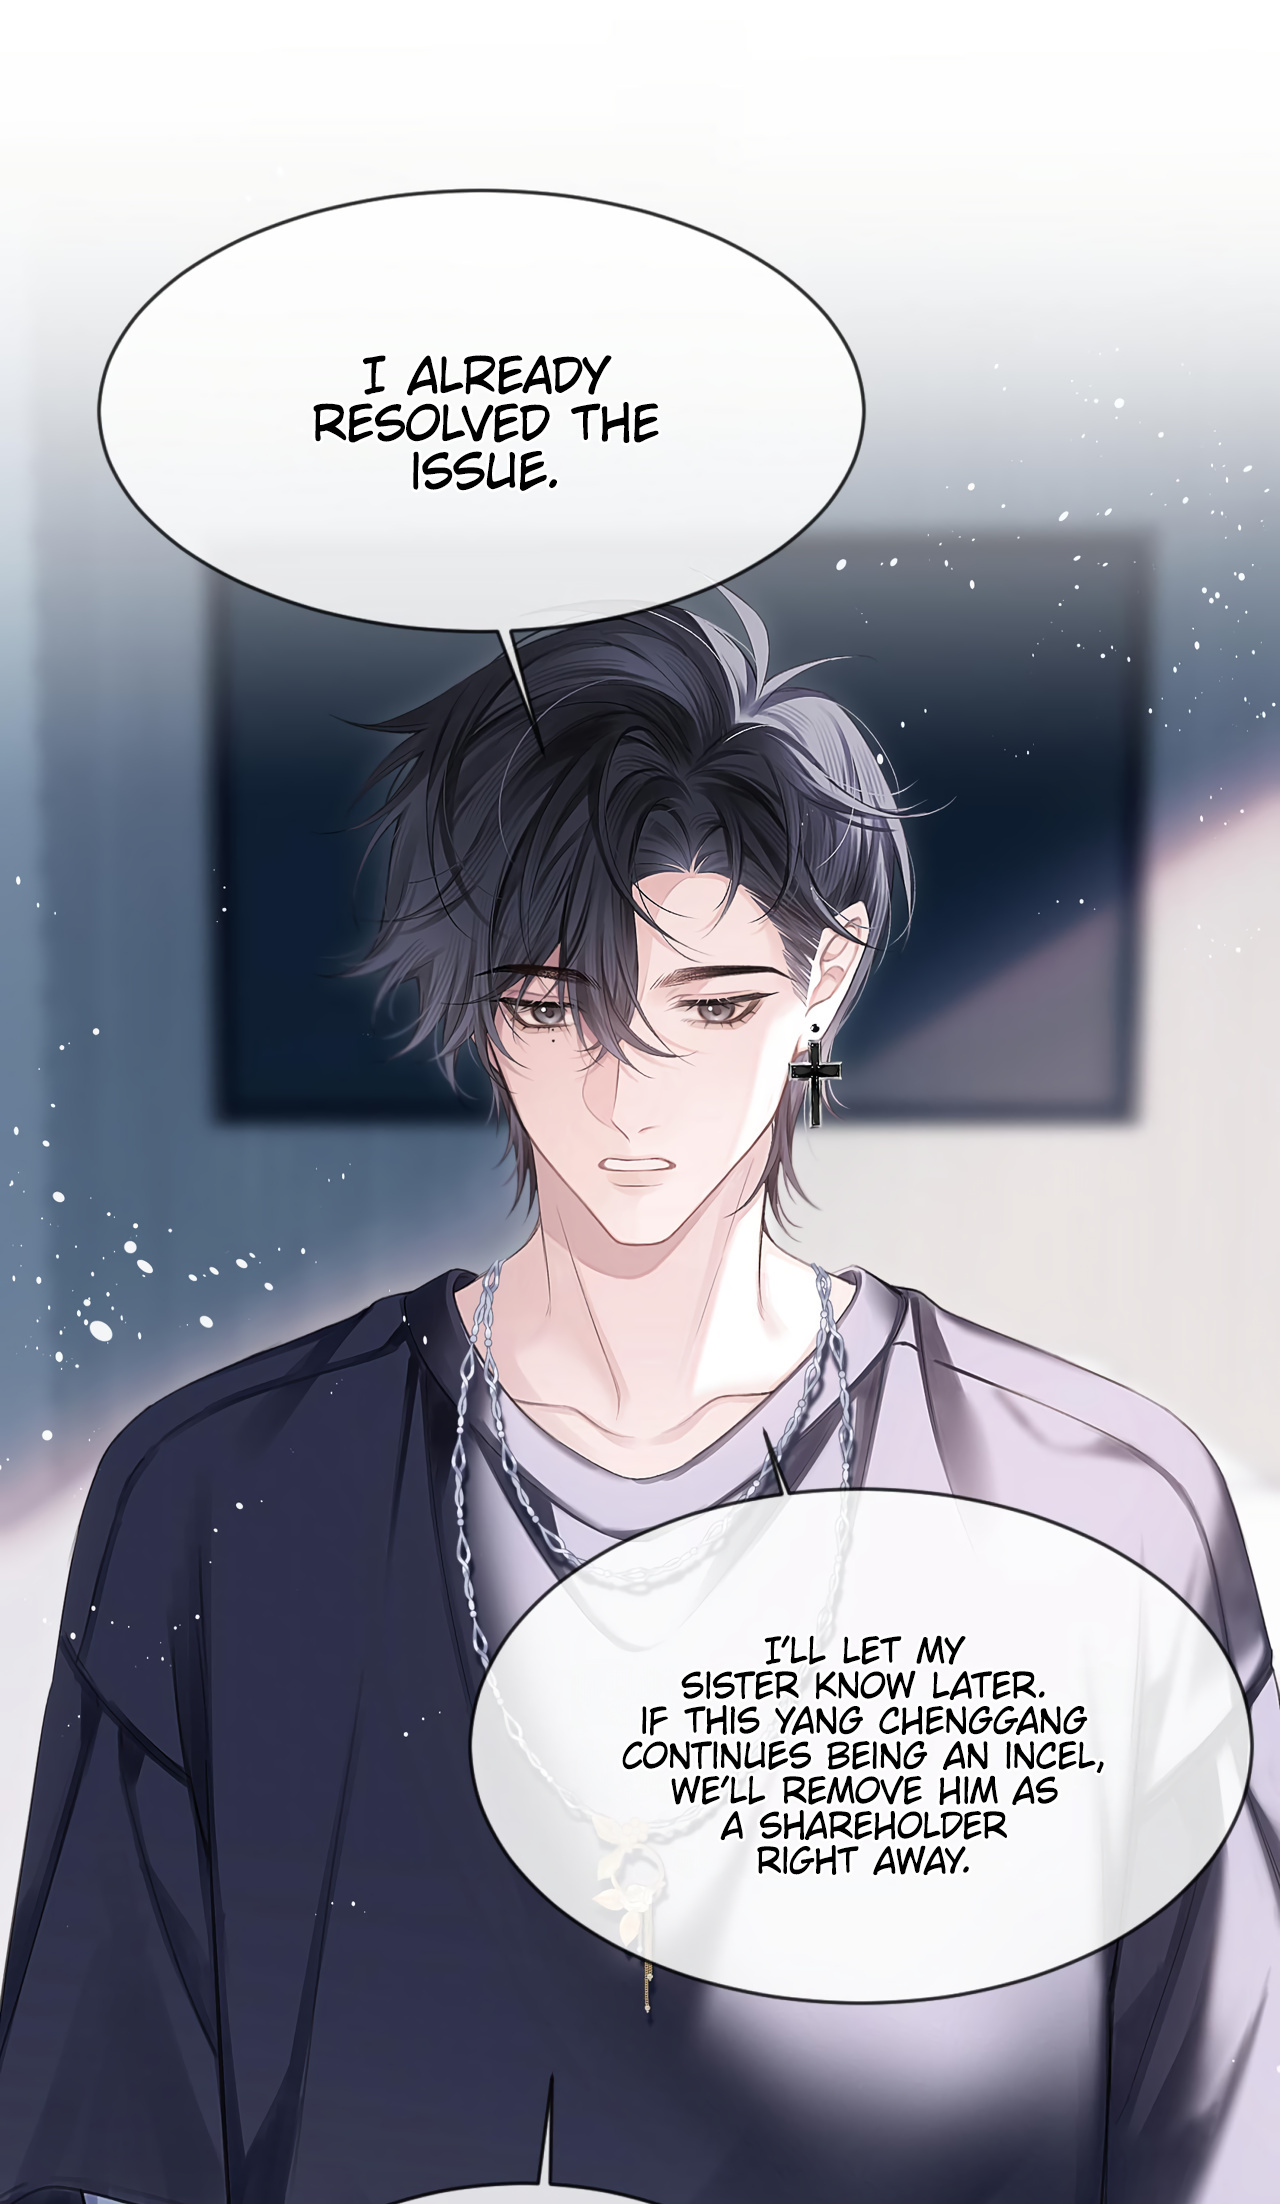 Fanservice Paradox Vol.1 Chapter 6